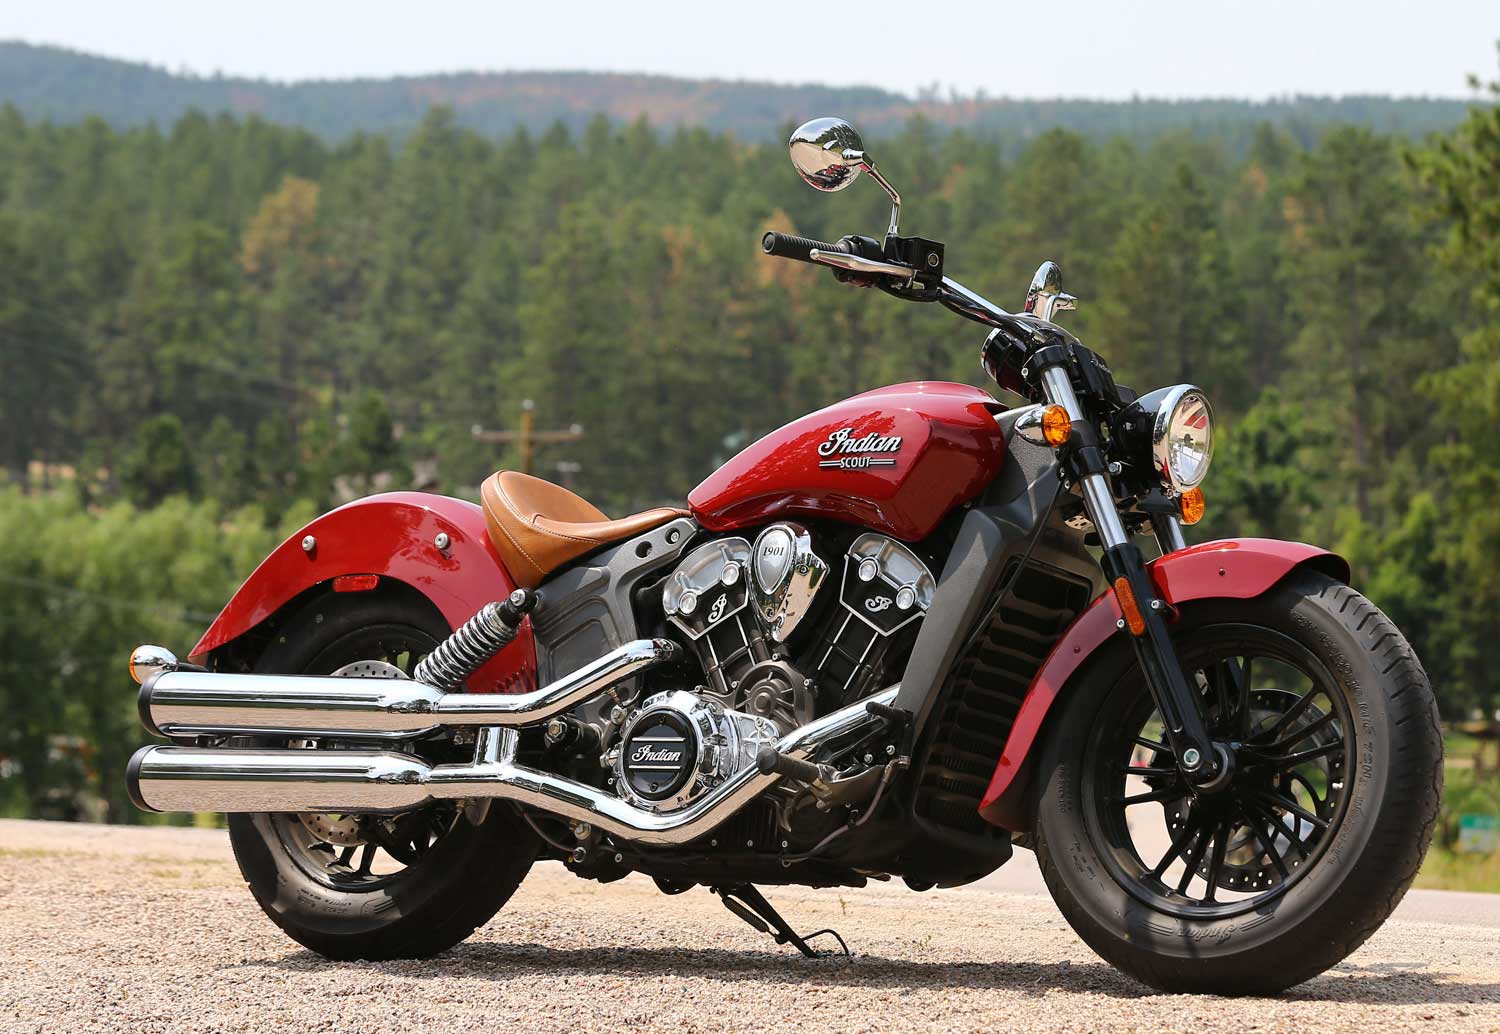 Indian Scout Backgrounds, Compatible - PC, Mobile, Gadgets| 1500x1034 px